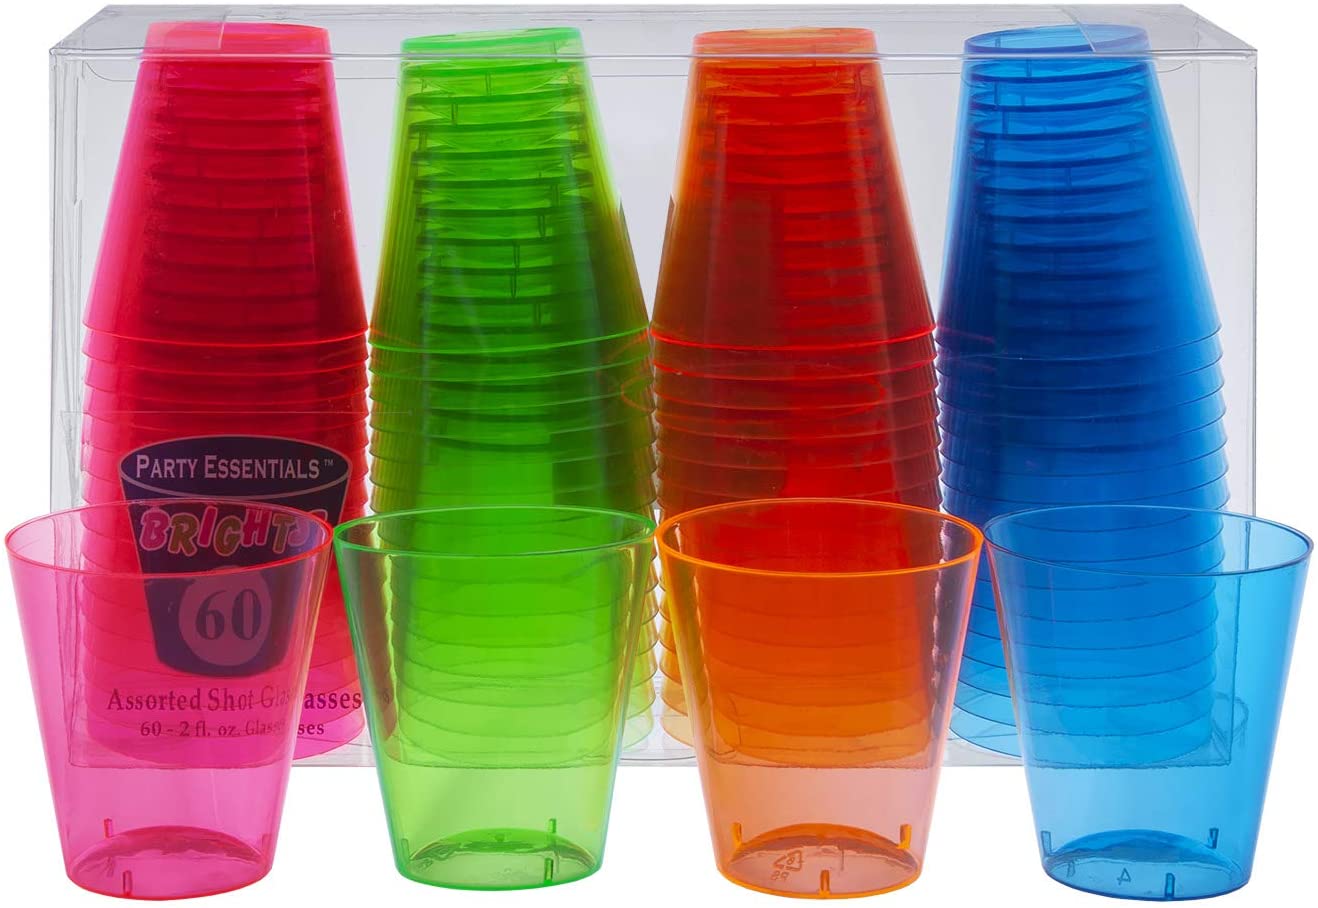 Party Essentials Rainbow Party Disposable Shot Glasses, 60-Count